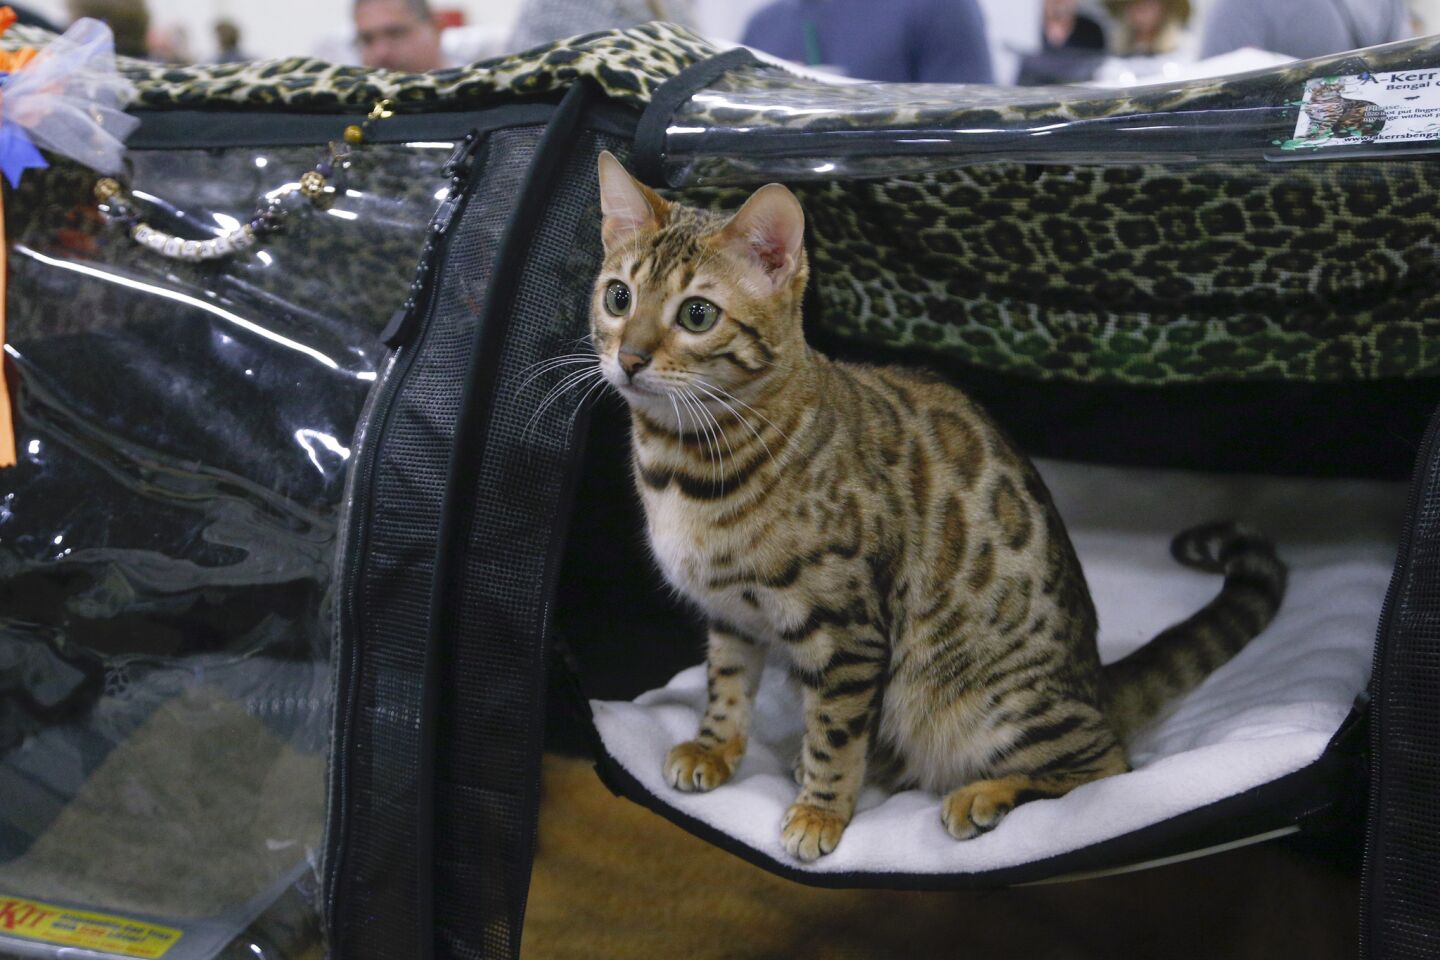 San Diego Cat Show, "Food and Water Bowl XXVI"